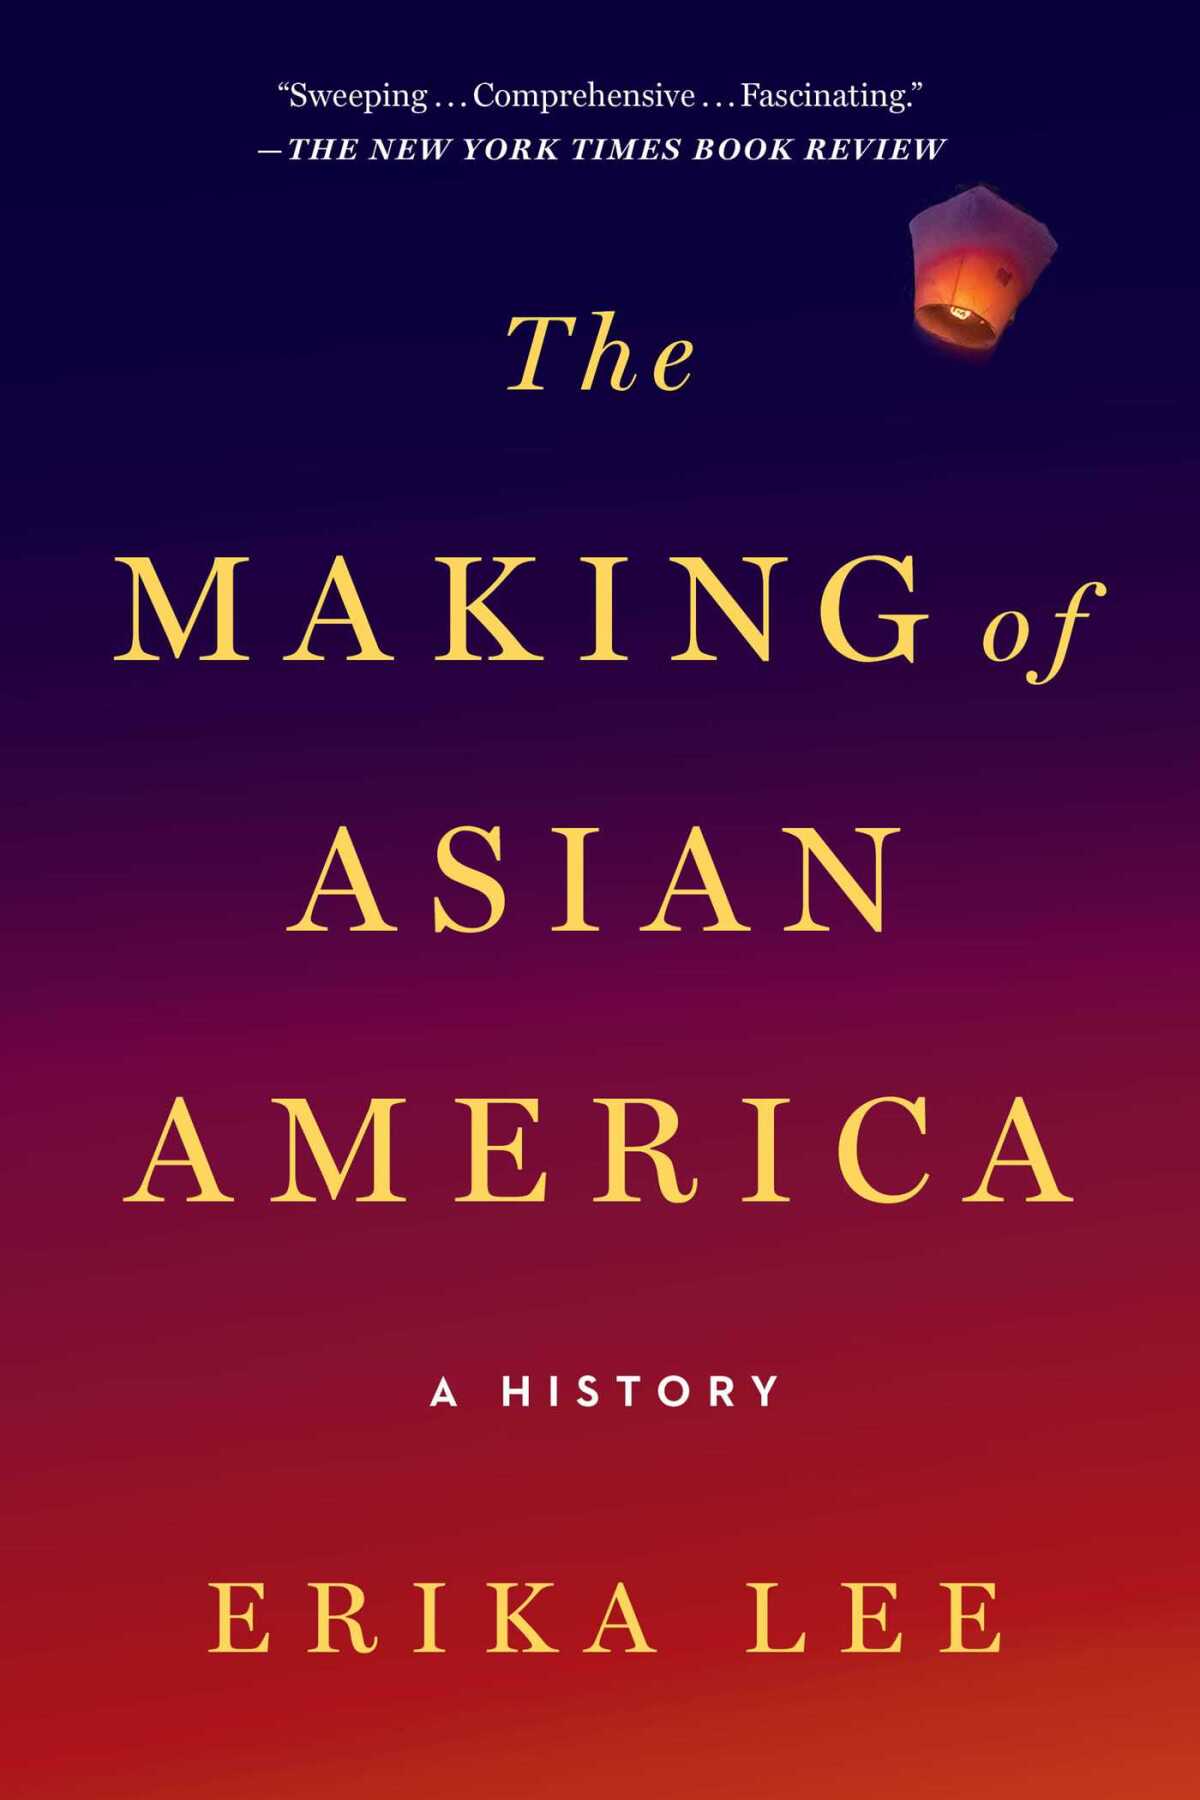 Book jacket for "The Making of Asian America" by Erika Lee